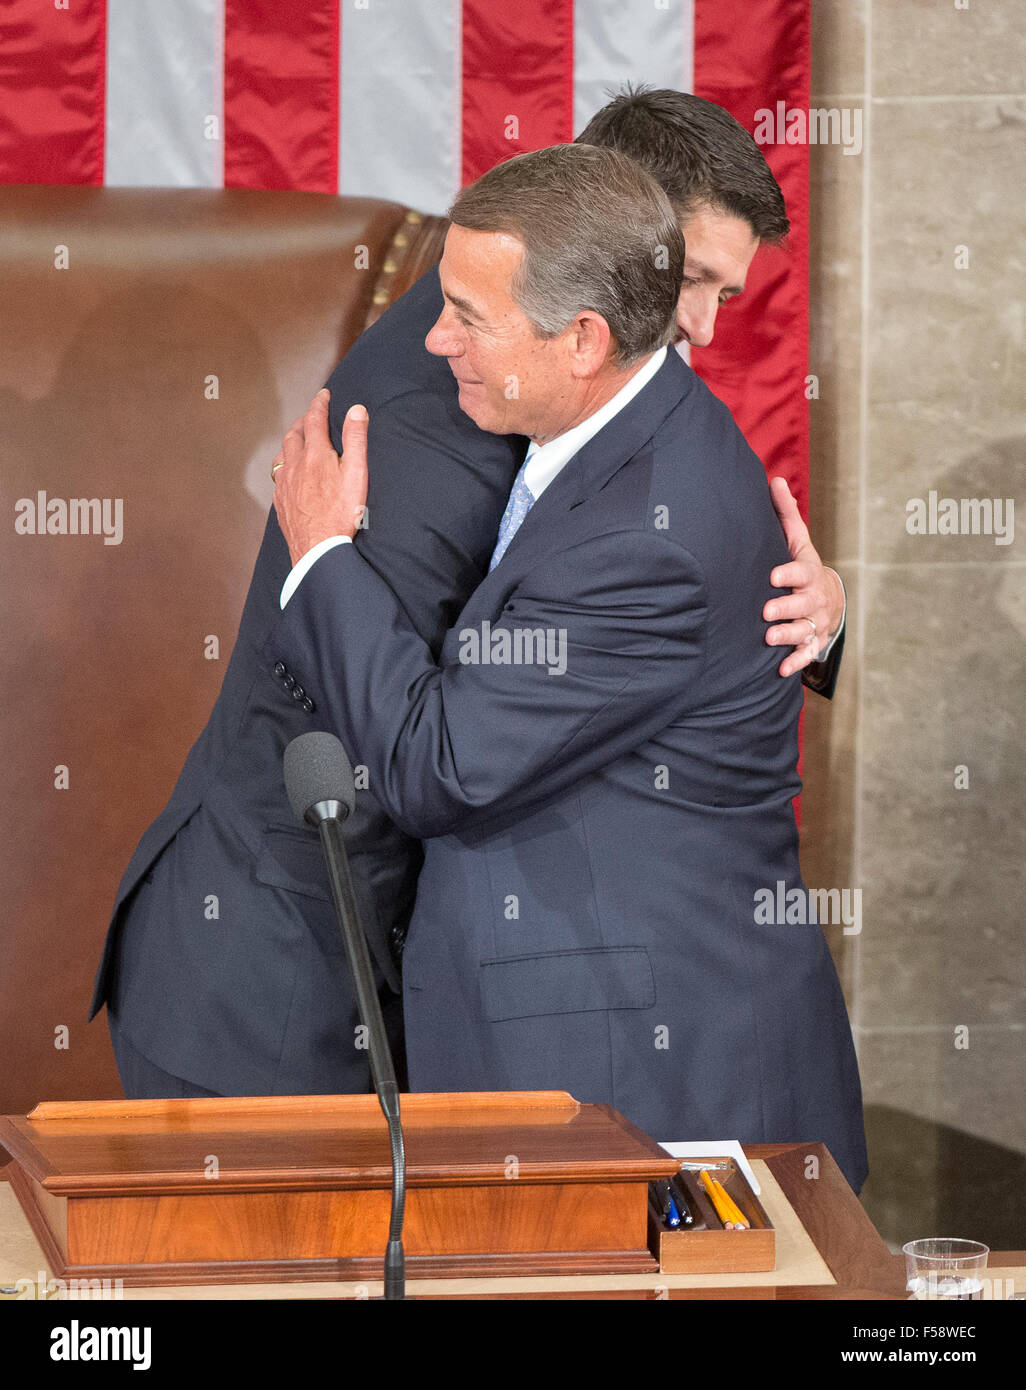 Washington, DC, USA. 29th October, 2015.  Incoming Speaker of the United States House of Representatives Paul Ryan (Republican of Wisconsin), left, is welcomed to the podium by outgoing Speaker John Boehner (Republican of Ohio), right, as Ryan assumes his duties of the office in the US House Chamber in the US Capitol in Washington, DC on Thursday, October 29, 2015. Credit:  dpa picture alliance/Alamy Live News Stock Photo